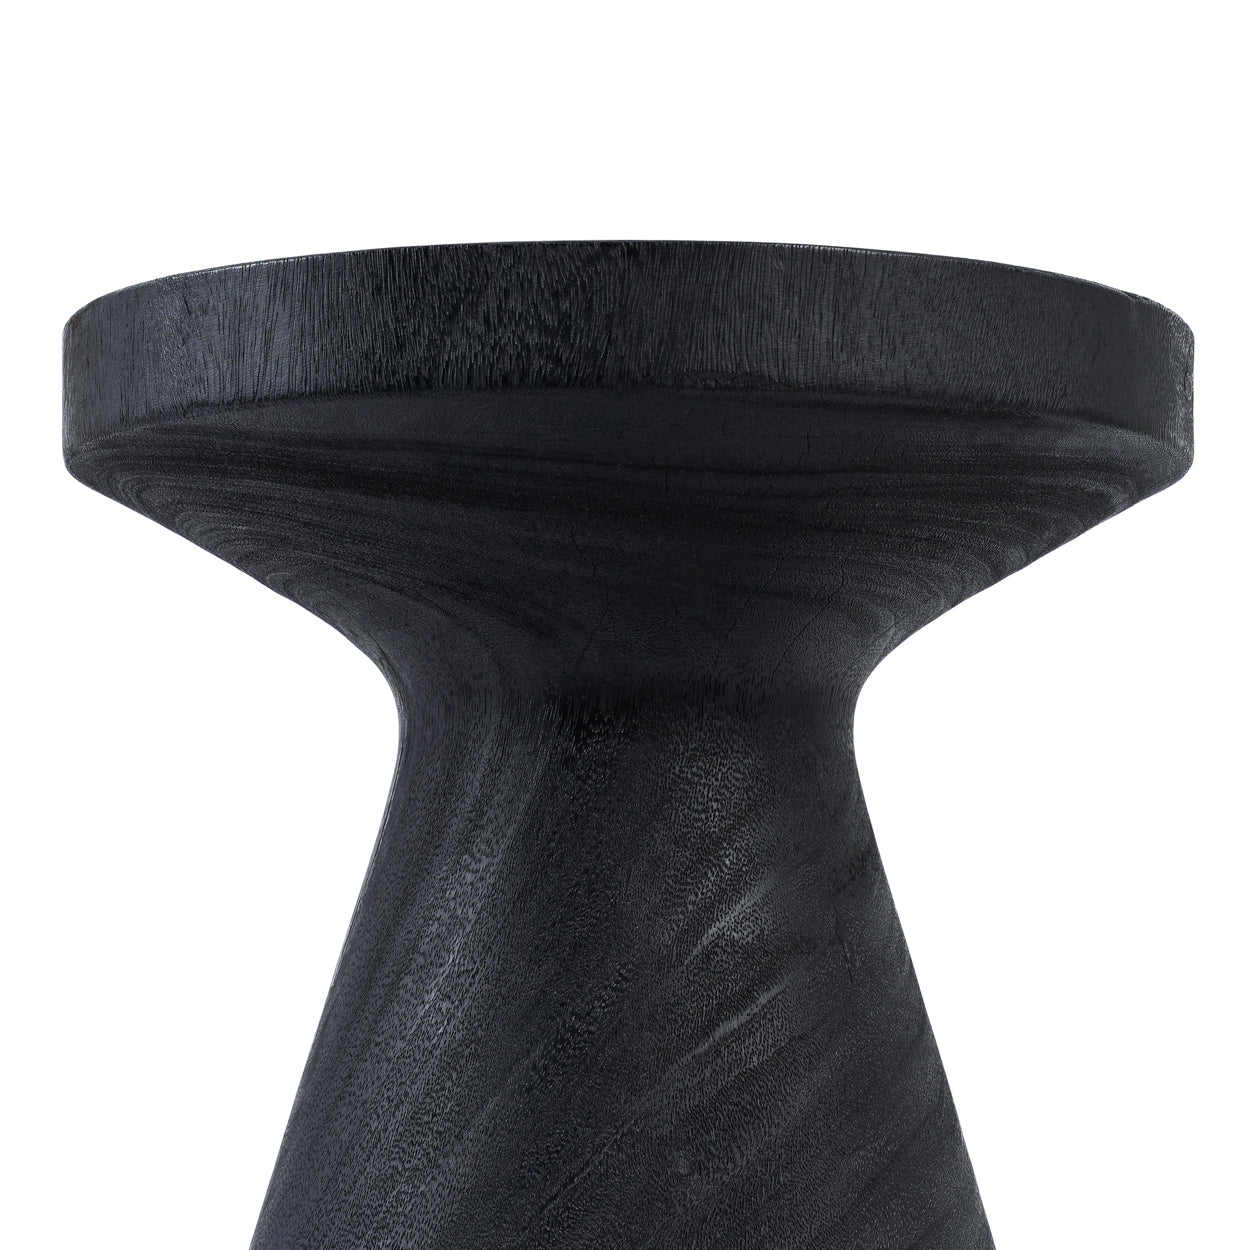 The GRAVITY Side Table - Black